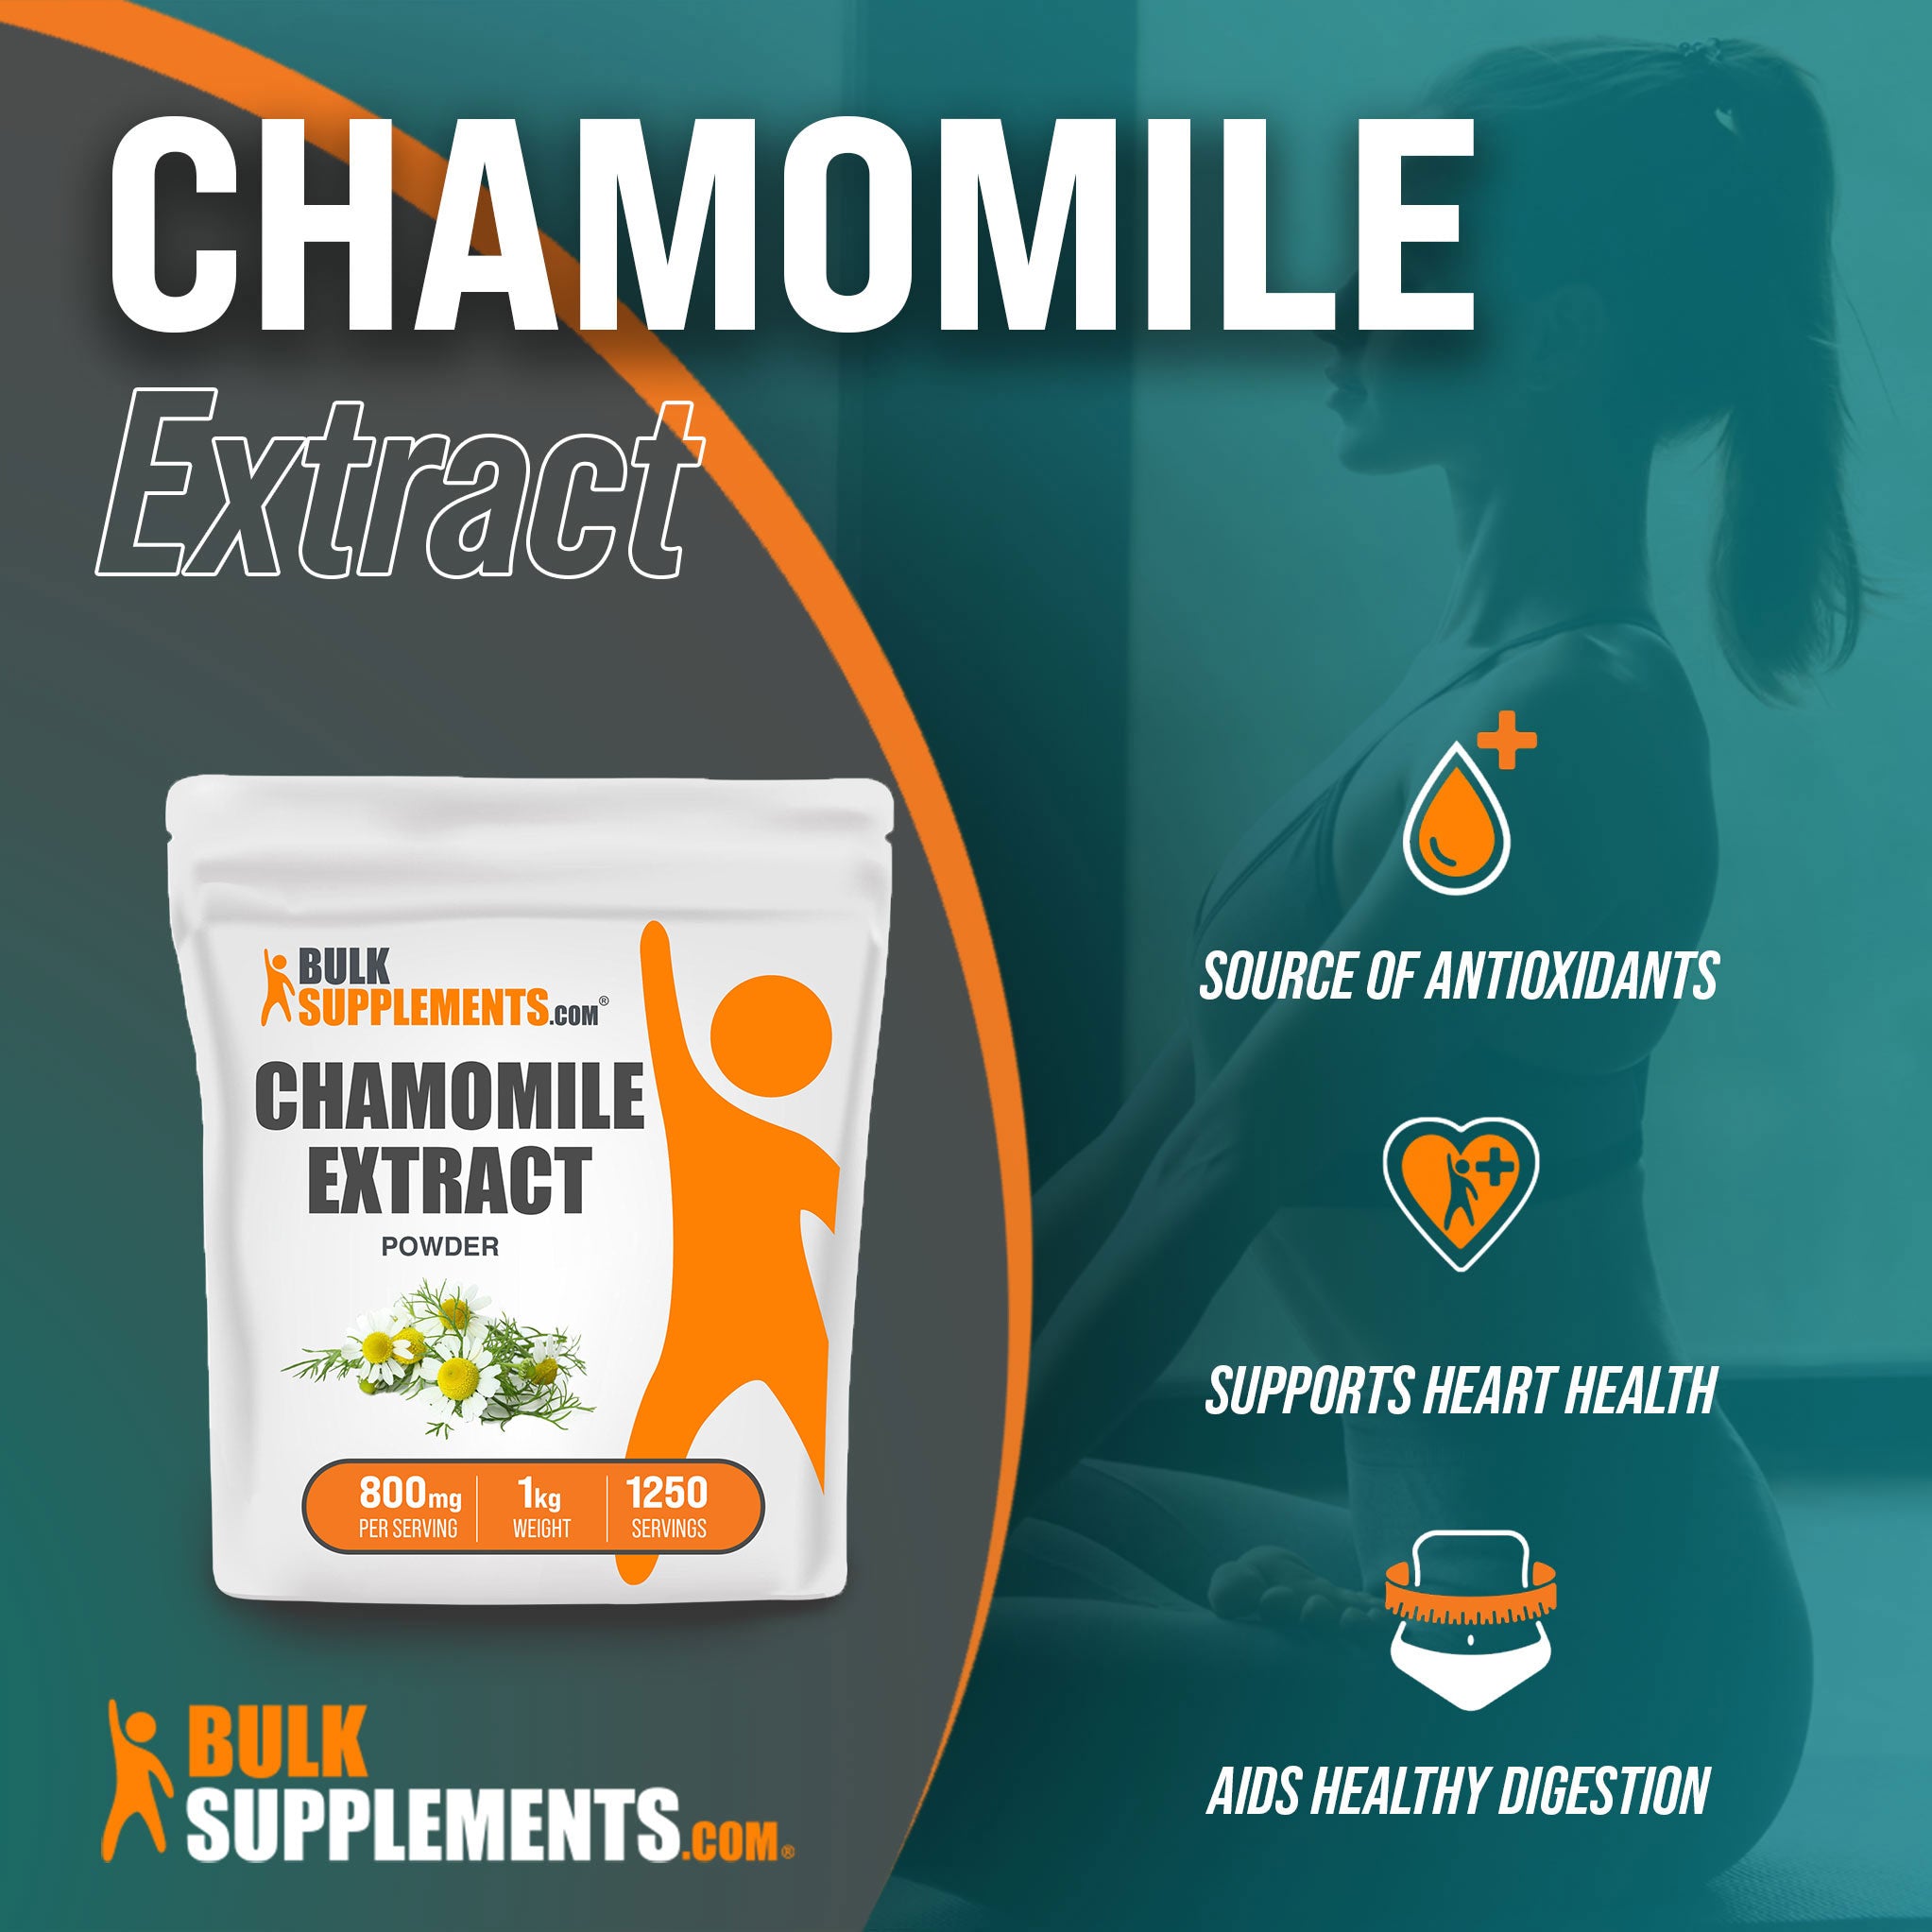 Benefits of our 1kg Chamomile Extract herbal supplements; source of antioxidants, supports heart health, aids healthy digestion